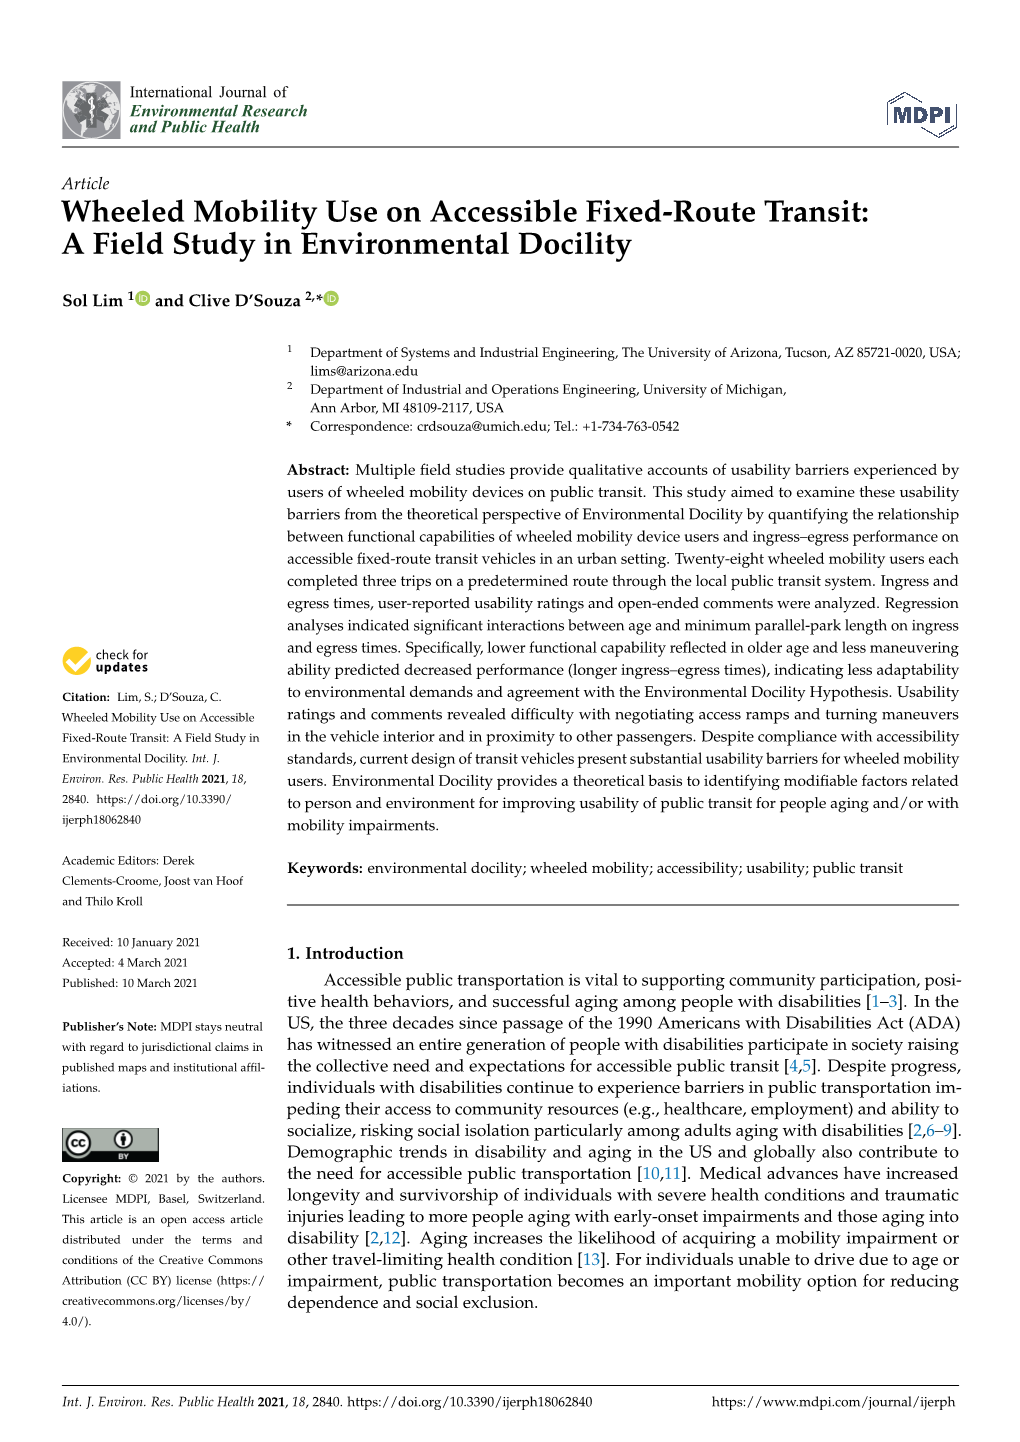 Wheeled Mobility Use on Accessible Fixed-Route Transit: a Field Study in Environmental Docility